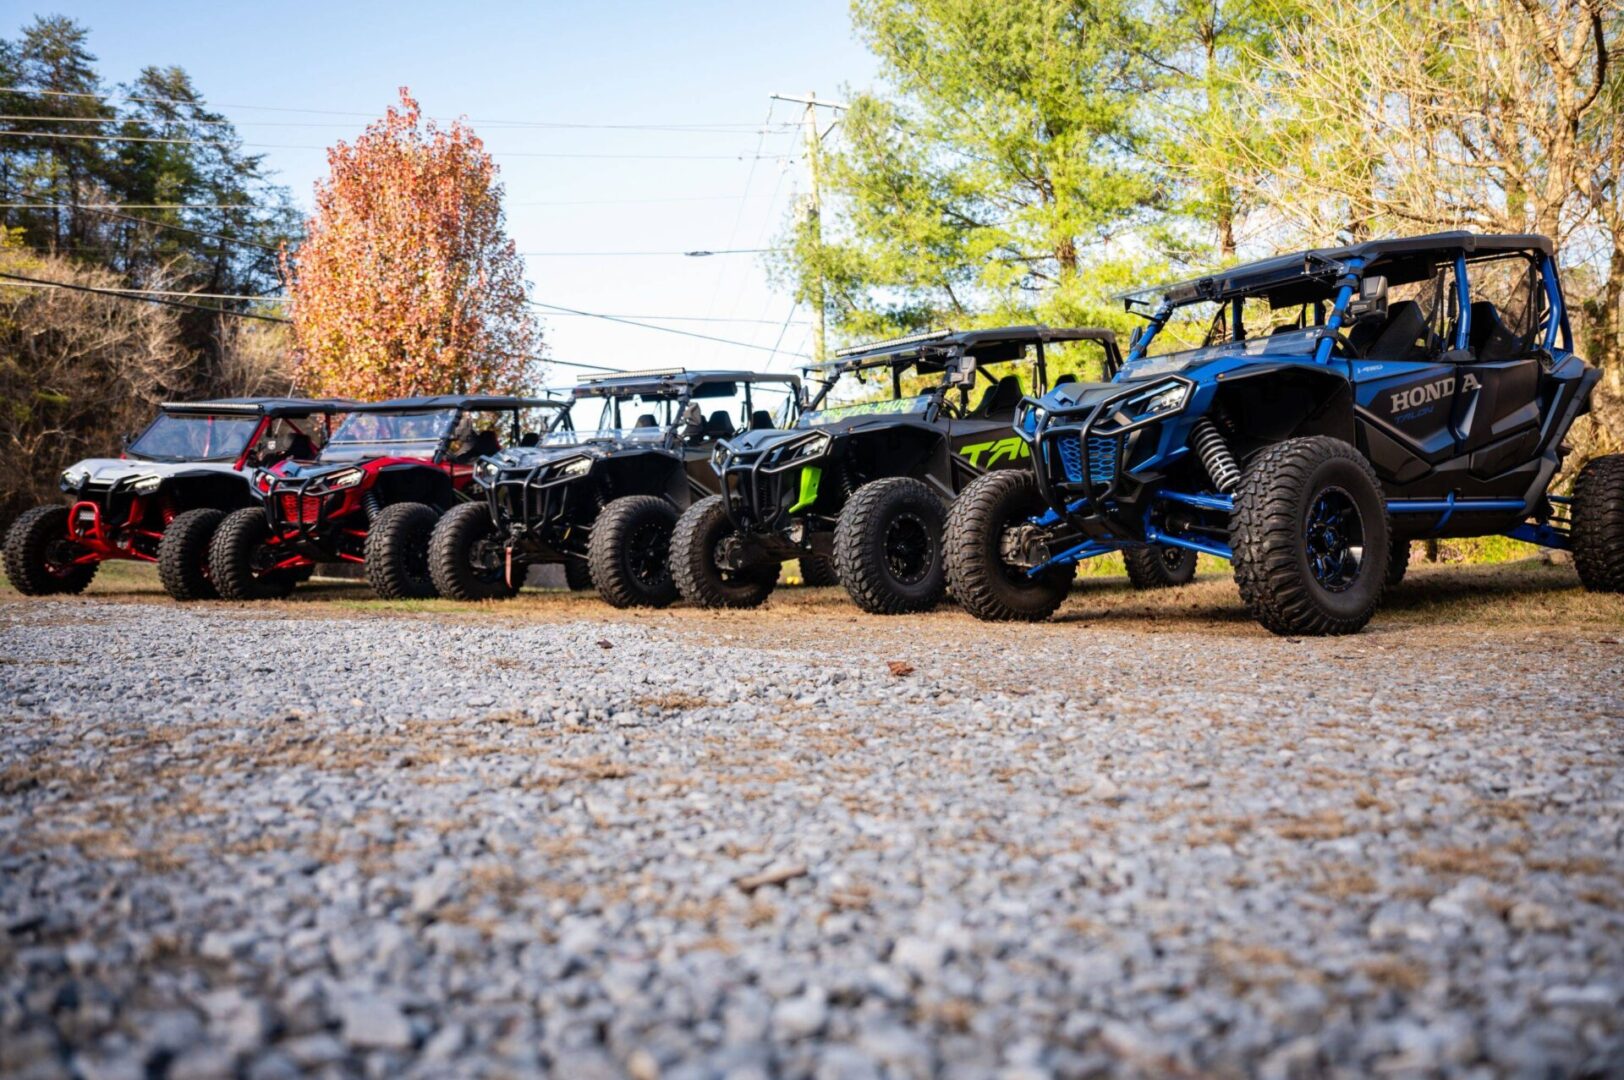 A line of off road vehicles parked on the side of a gravel road.